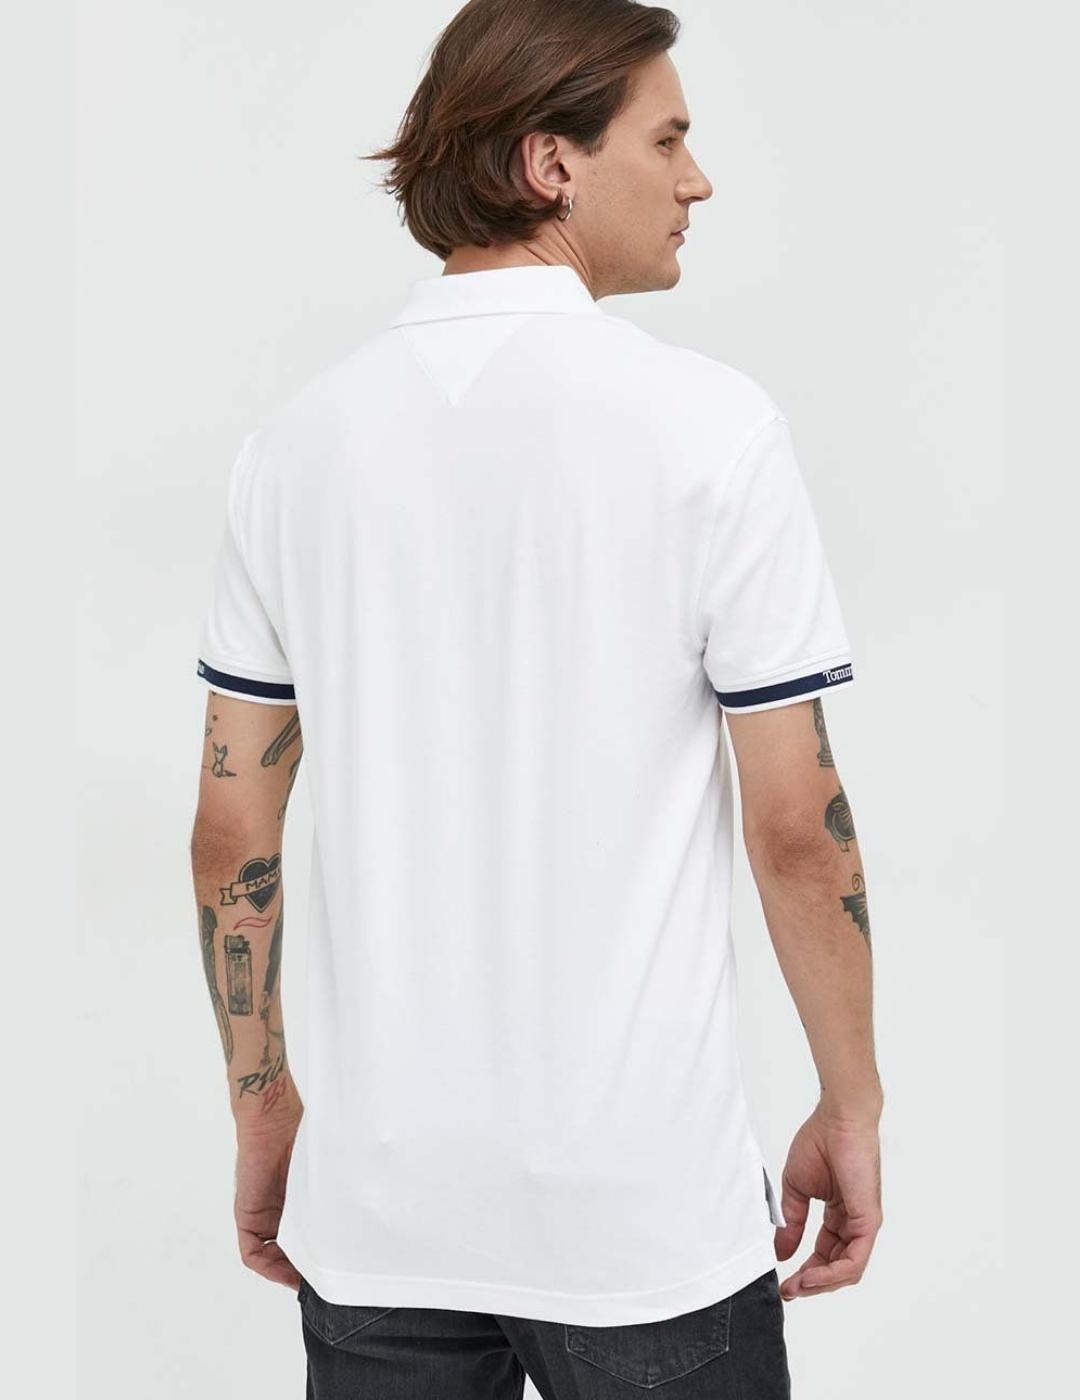 Polo Tommy Jeans essential blanco para hombre